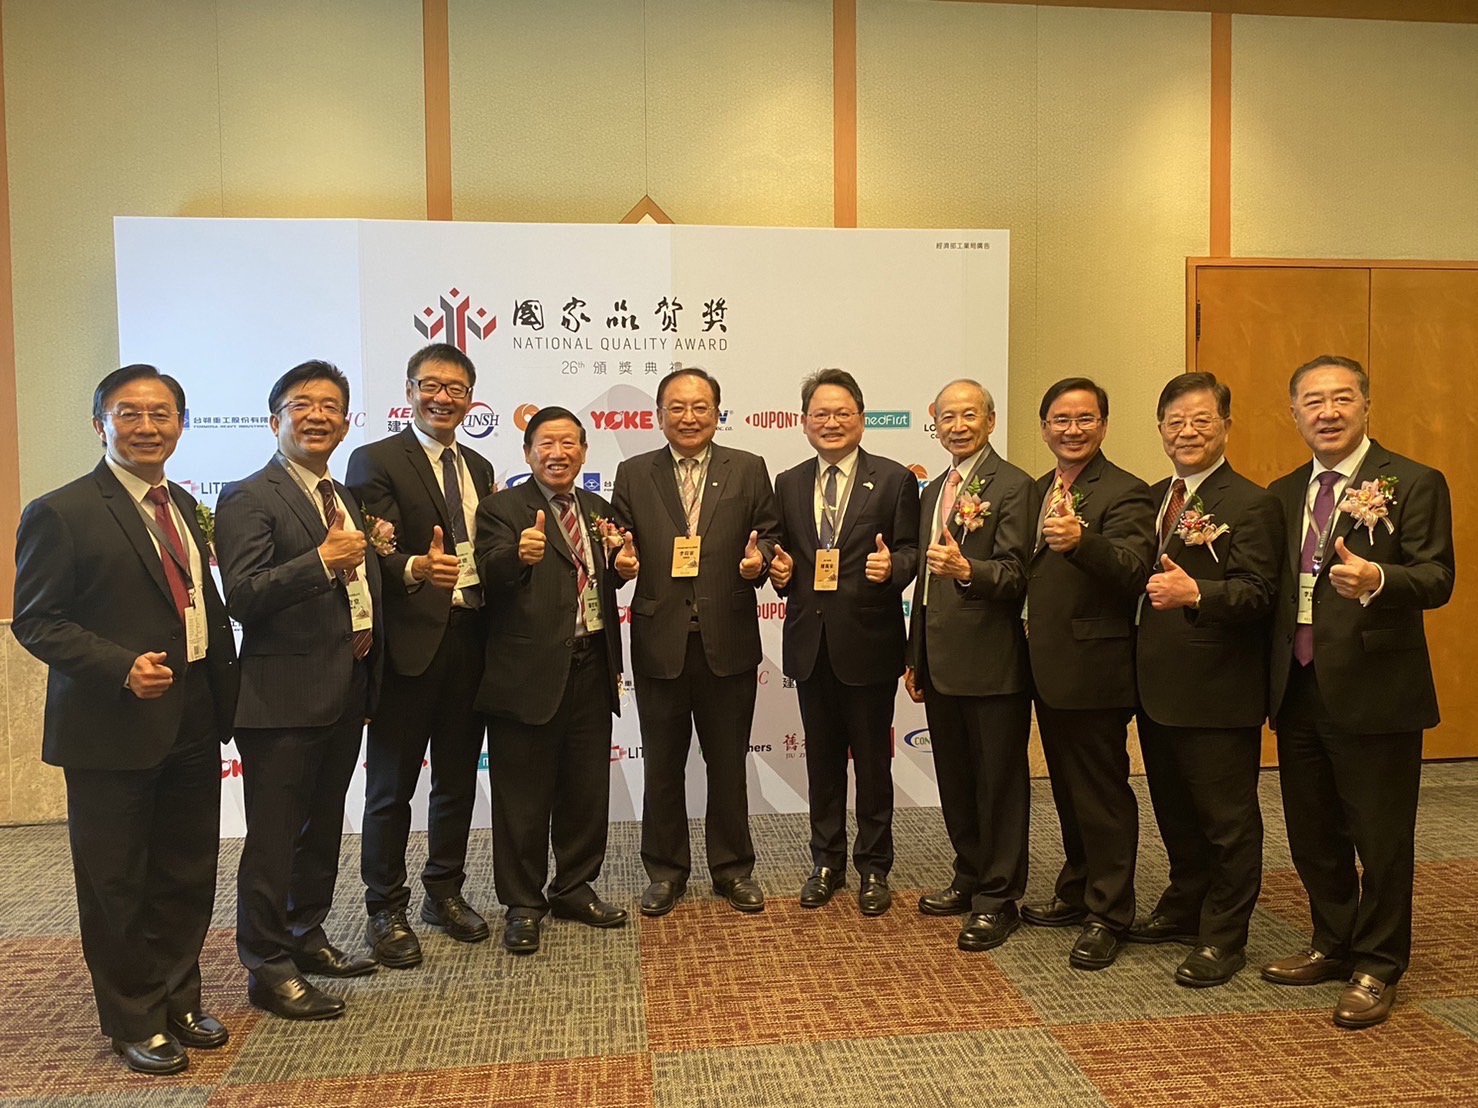 President Gary Chen of the SMEs Award Fellowship Committee came to congratulate the new companies that won the 26th of National Quality award